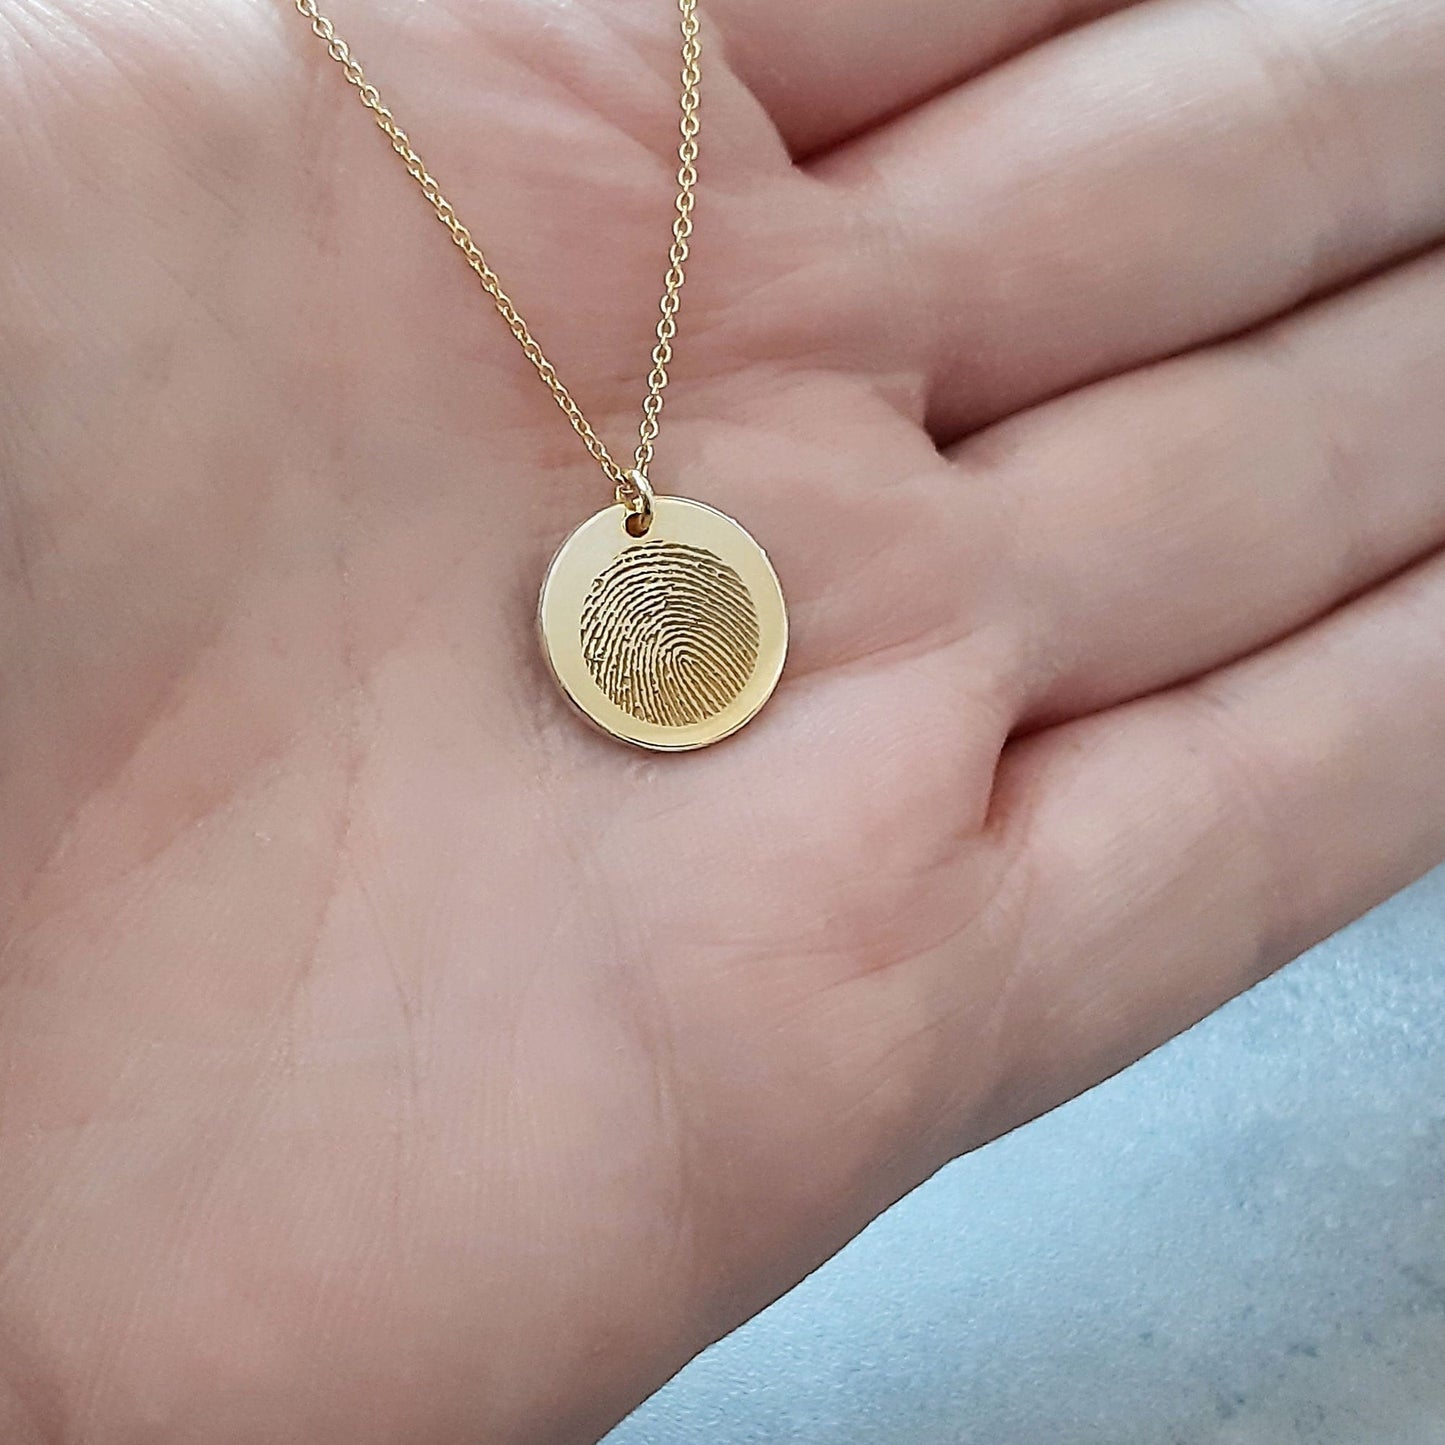 Real gold Actual Fingerprint Necklace - Engraved Fingerprint Jewelry - handmade Jewelry - Memorial Necklace - Mom Gift - Personalized Gift